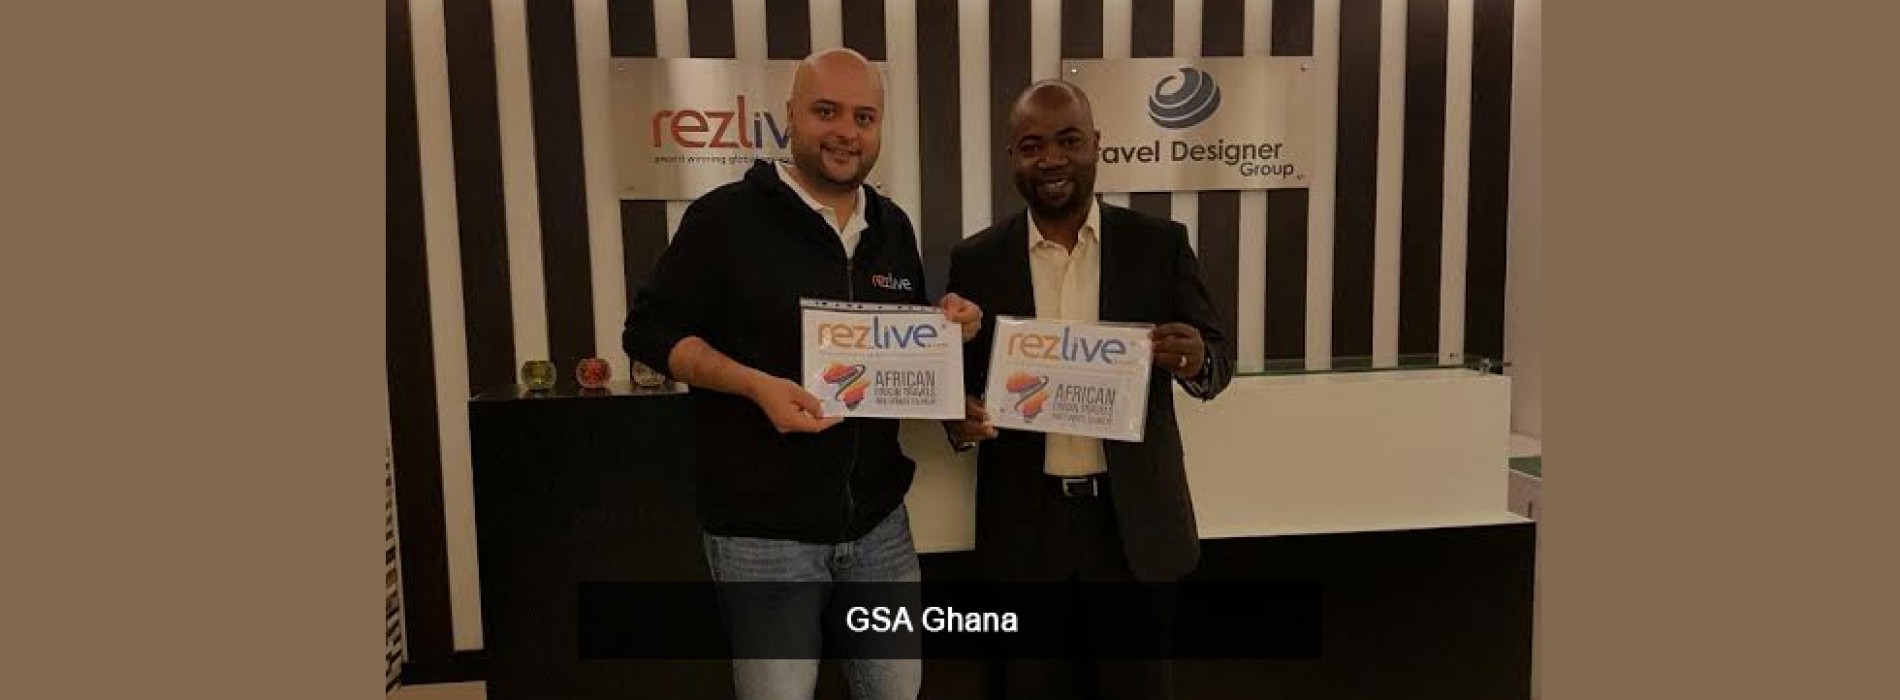 RezLive.com appoints “African Origin Travels & Sports Tourism” as its General Sales Agent in Ghana